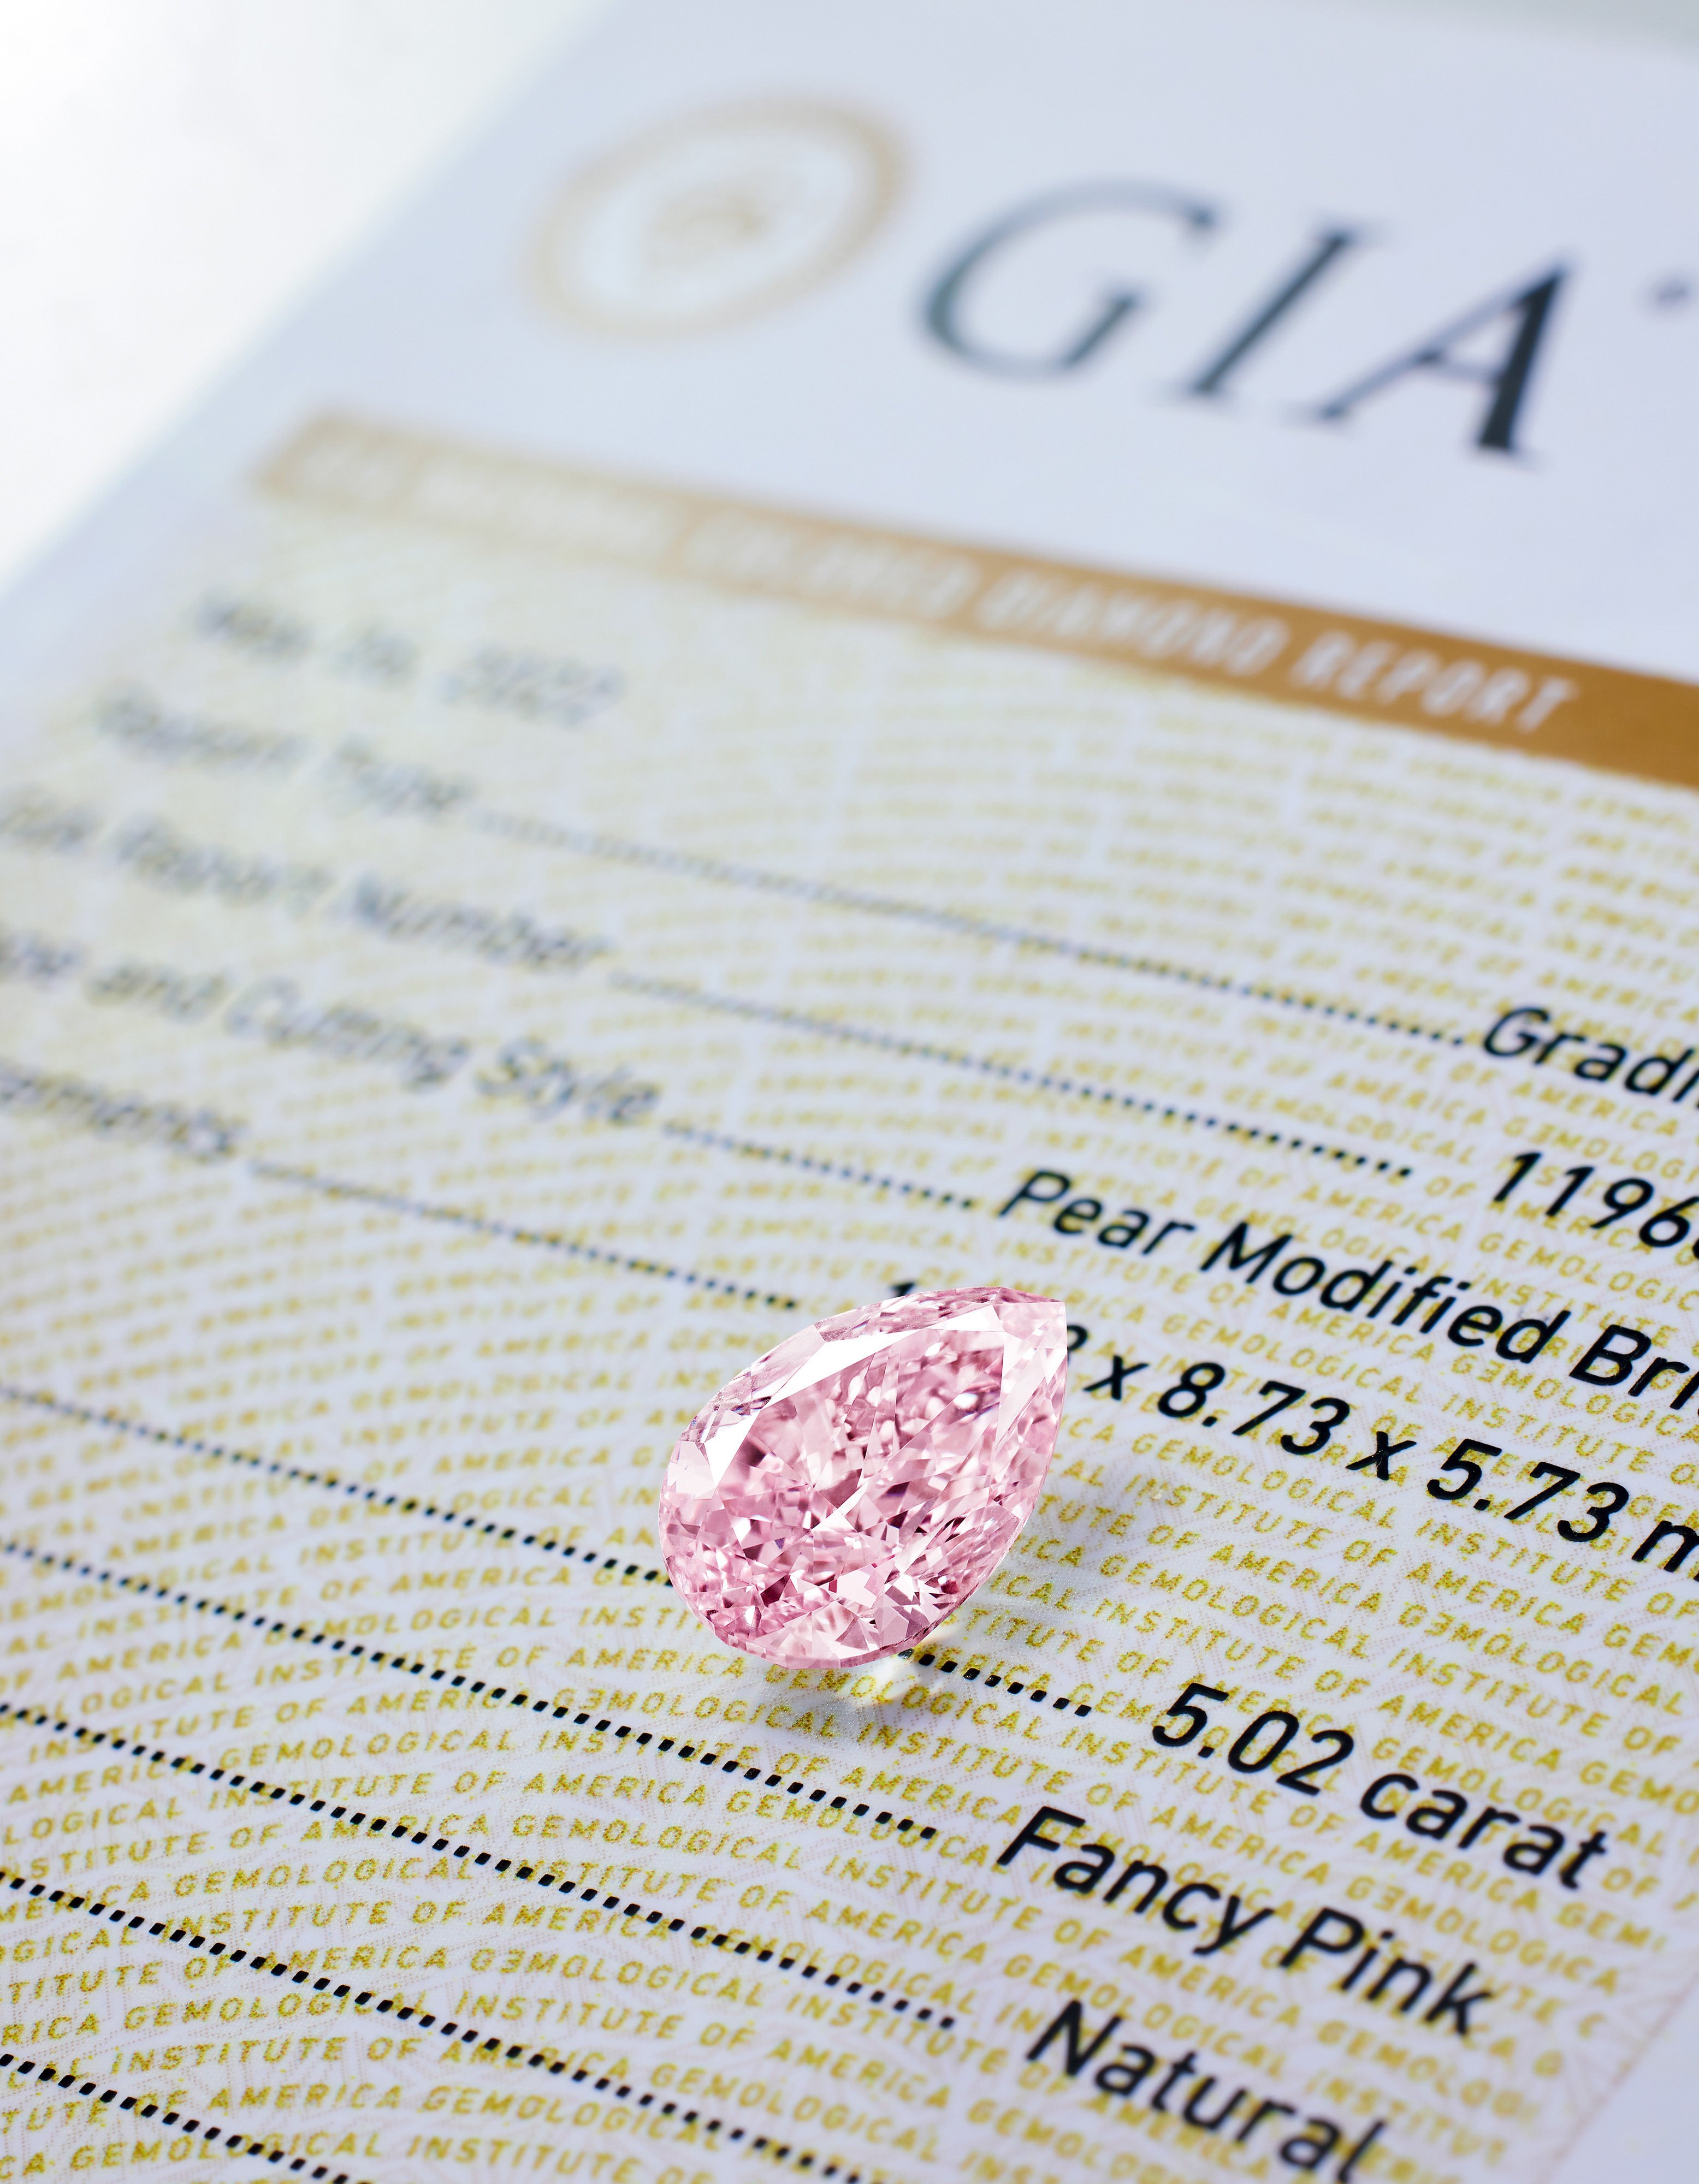 Sotheby’s Hong Kong Magnificent Jewels auction record sets the tone: rare diamond sparkles among strong figures for spring season, with Phillips’ numbers up too, and Bonhams’ and Christie’s sales to come. Pictured: A 5.02-carat fancy pink diamond, from Poly Auction Hong Kong. Photos: Handout